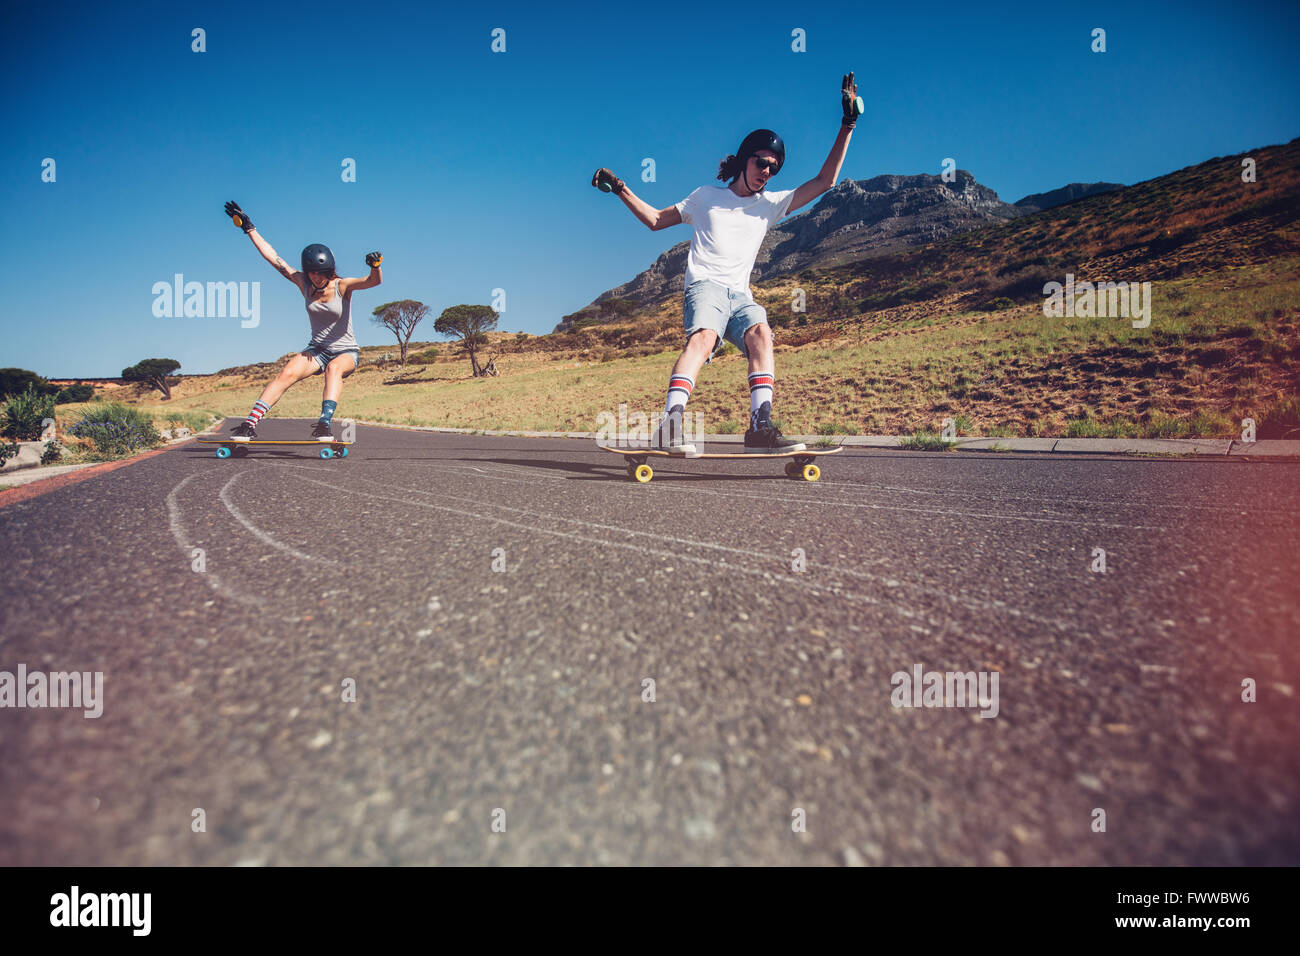 Young man and woman skateboarding on the road. Young couple practicing skating on a open road. Stock Photo